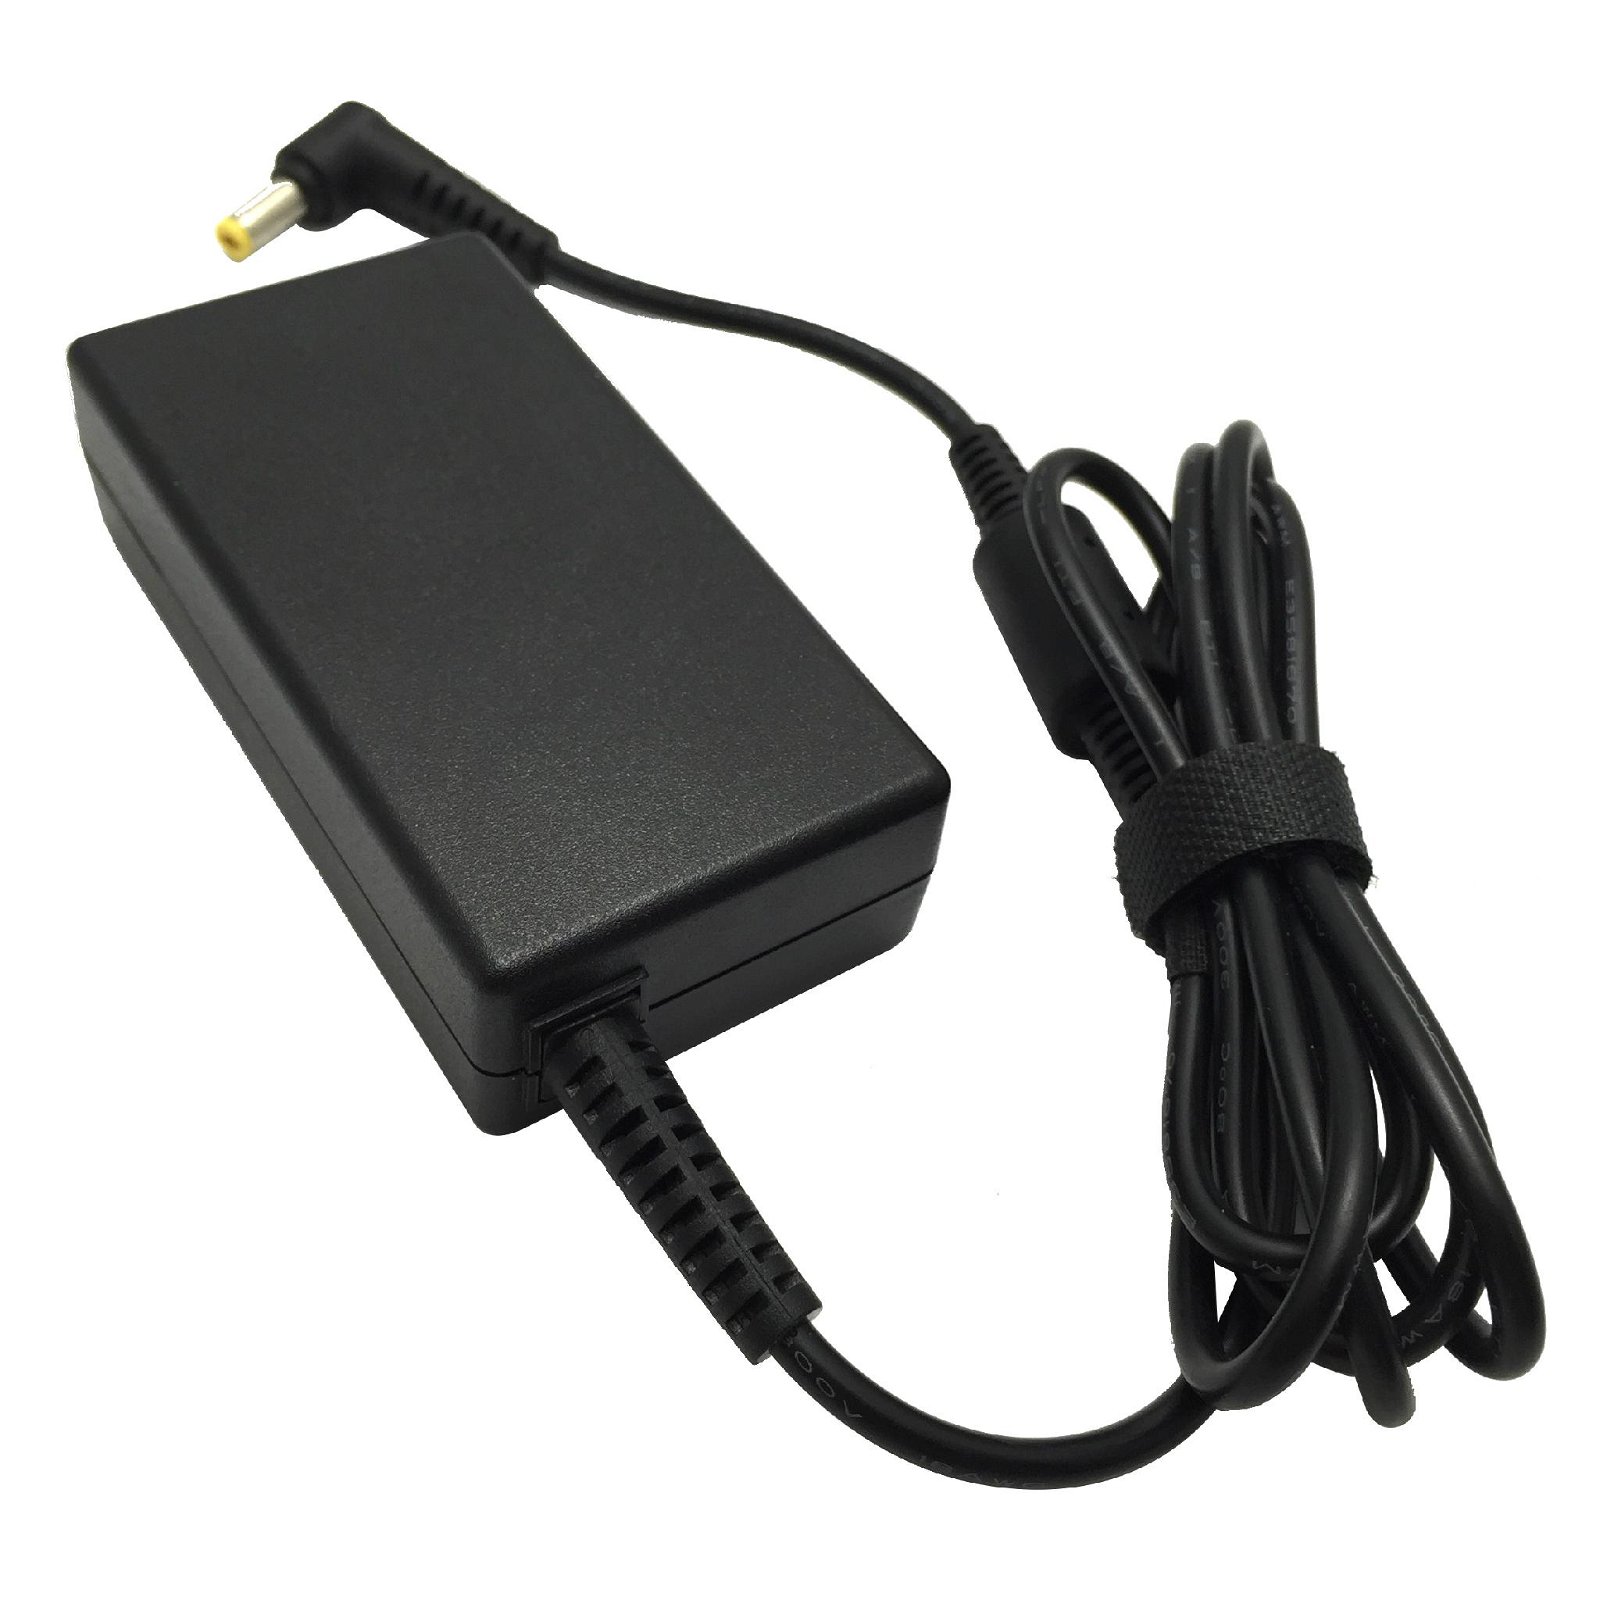 Laptop AC Power Adapter Charger 65w 19v 3.42a for Acer 3